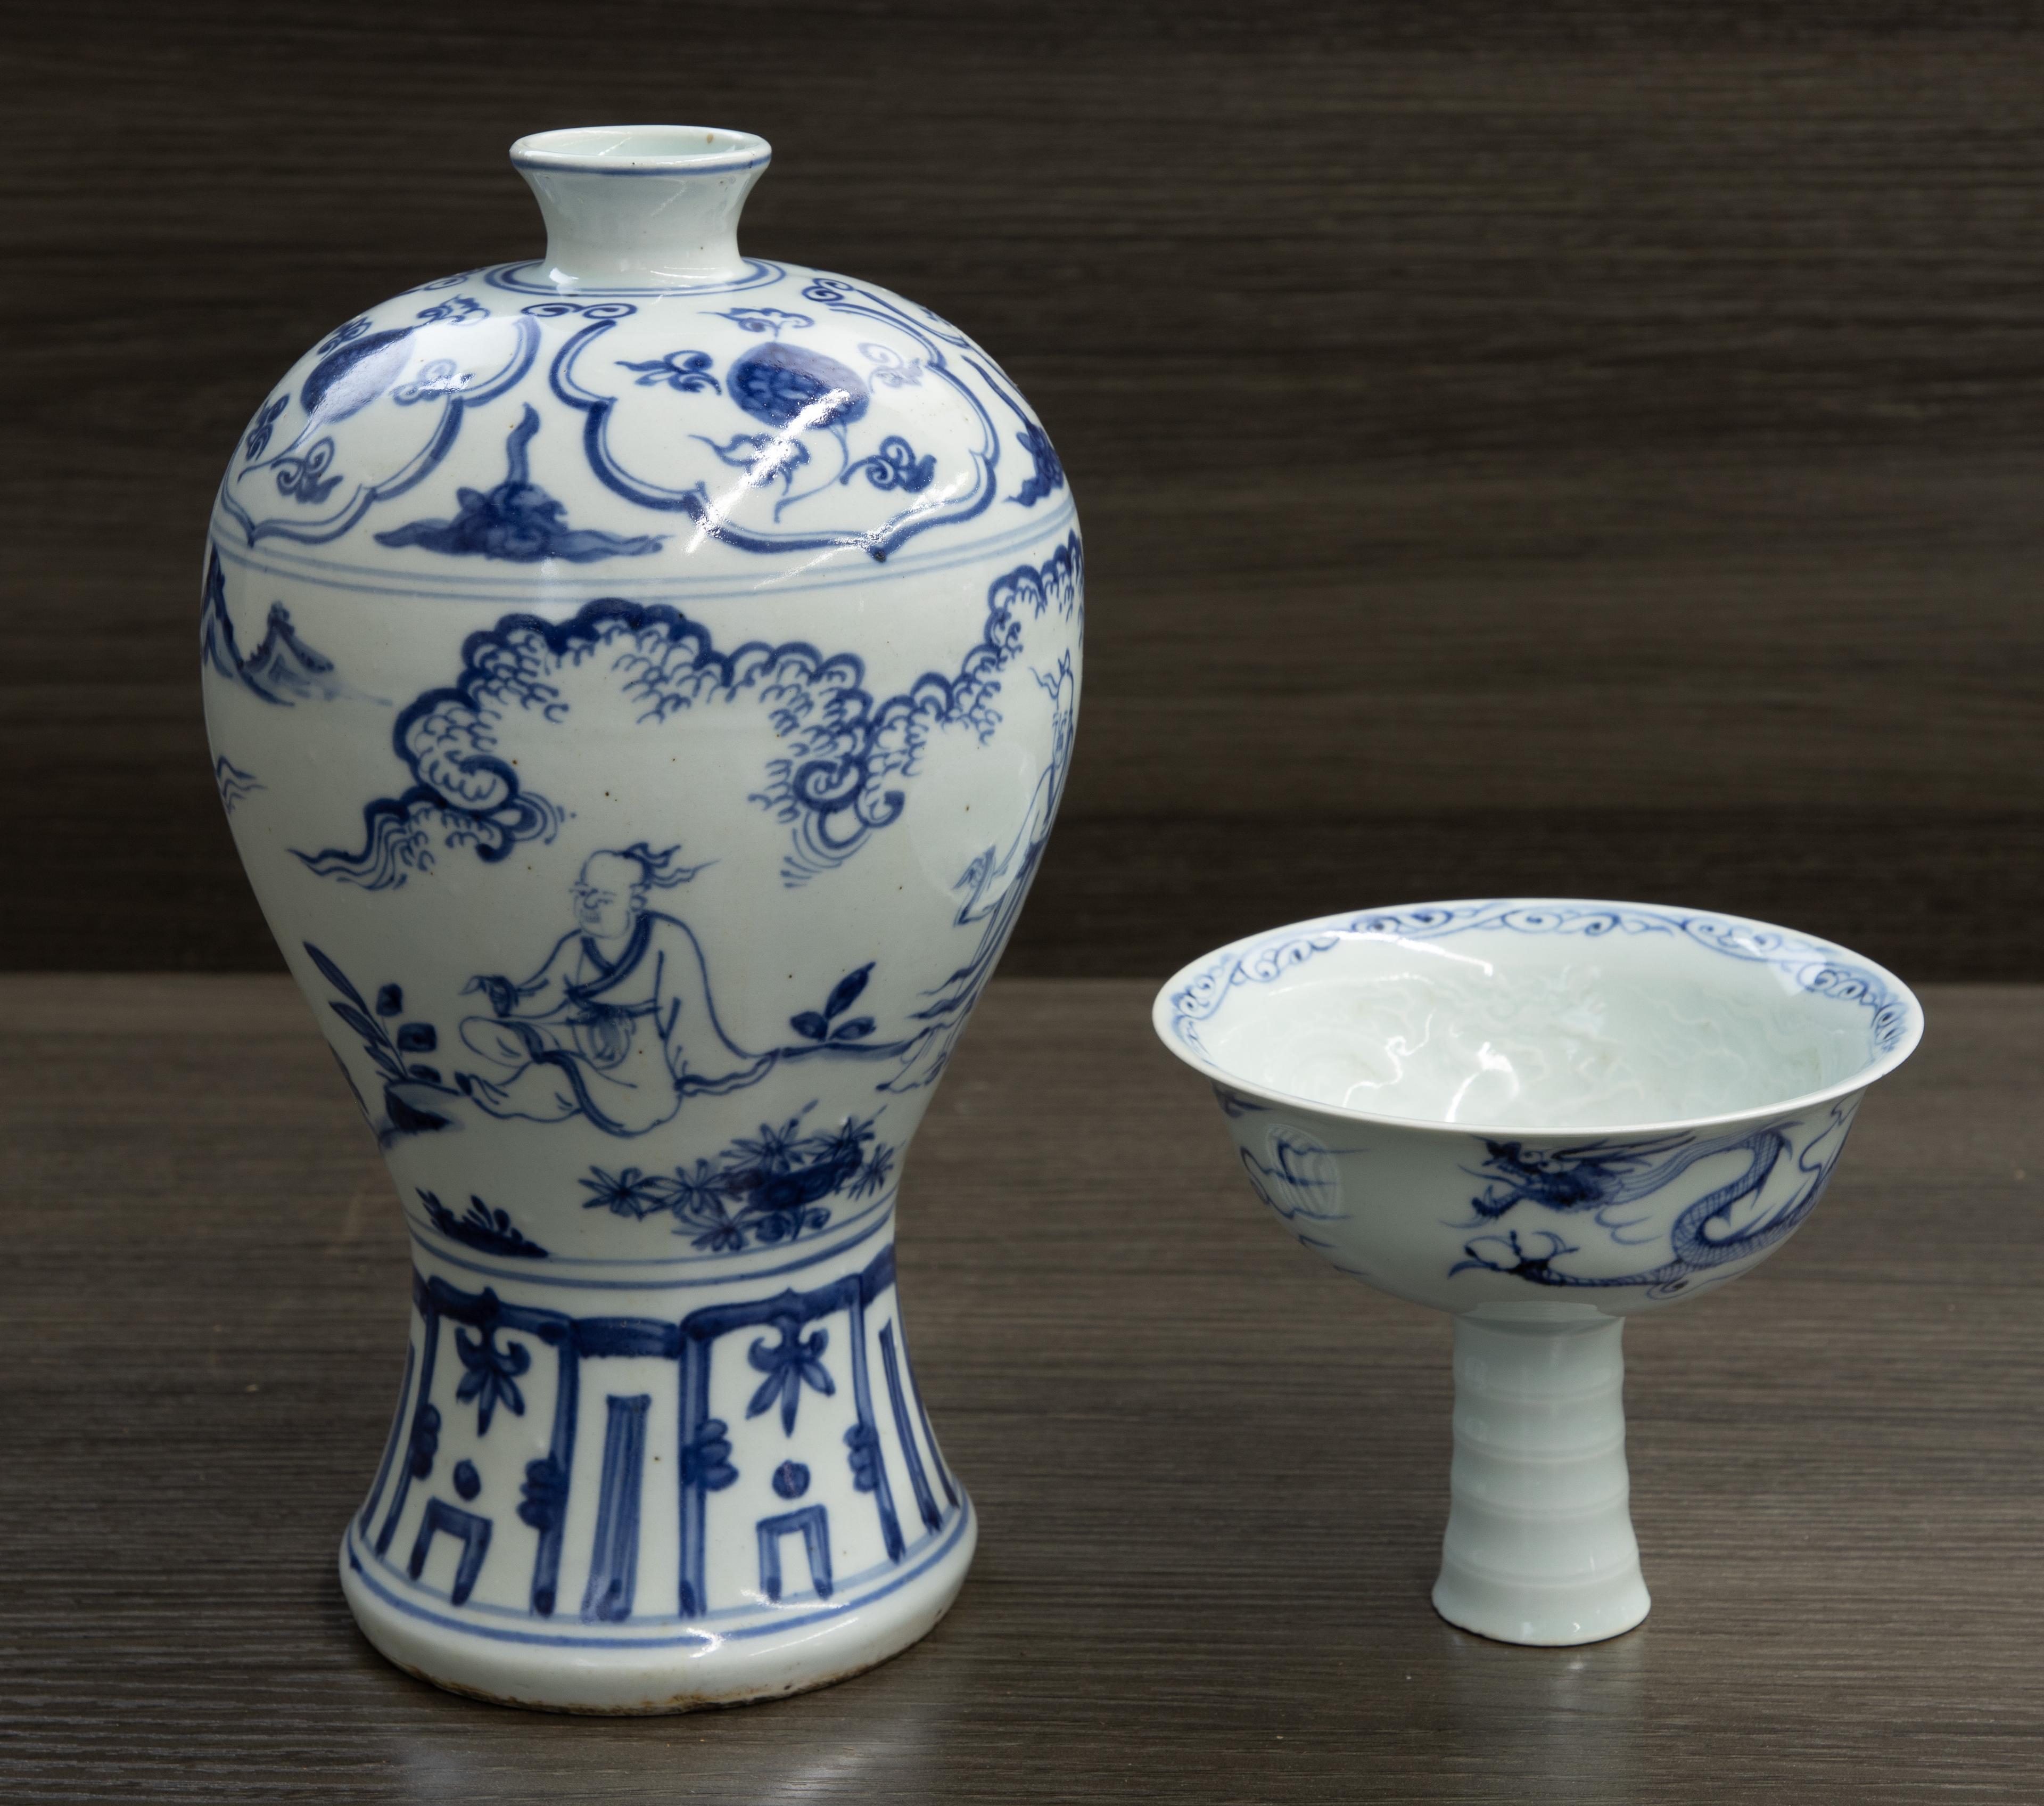 Chinese Blue and White Porcelain Meiping Vase and Stem Cup